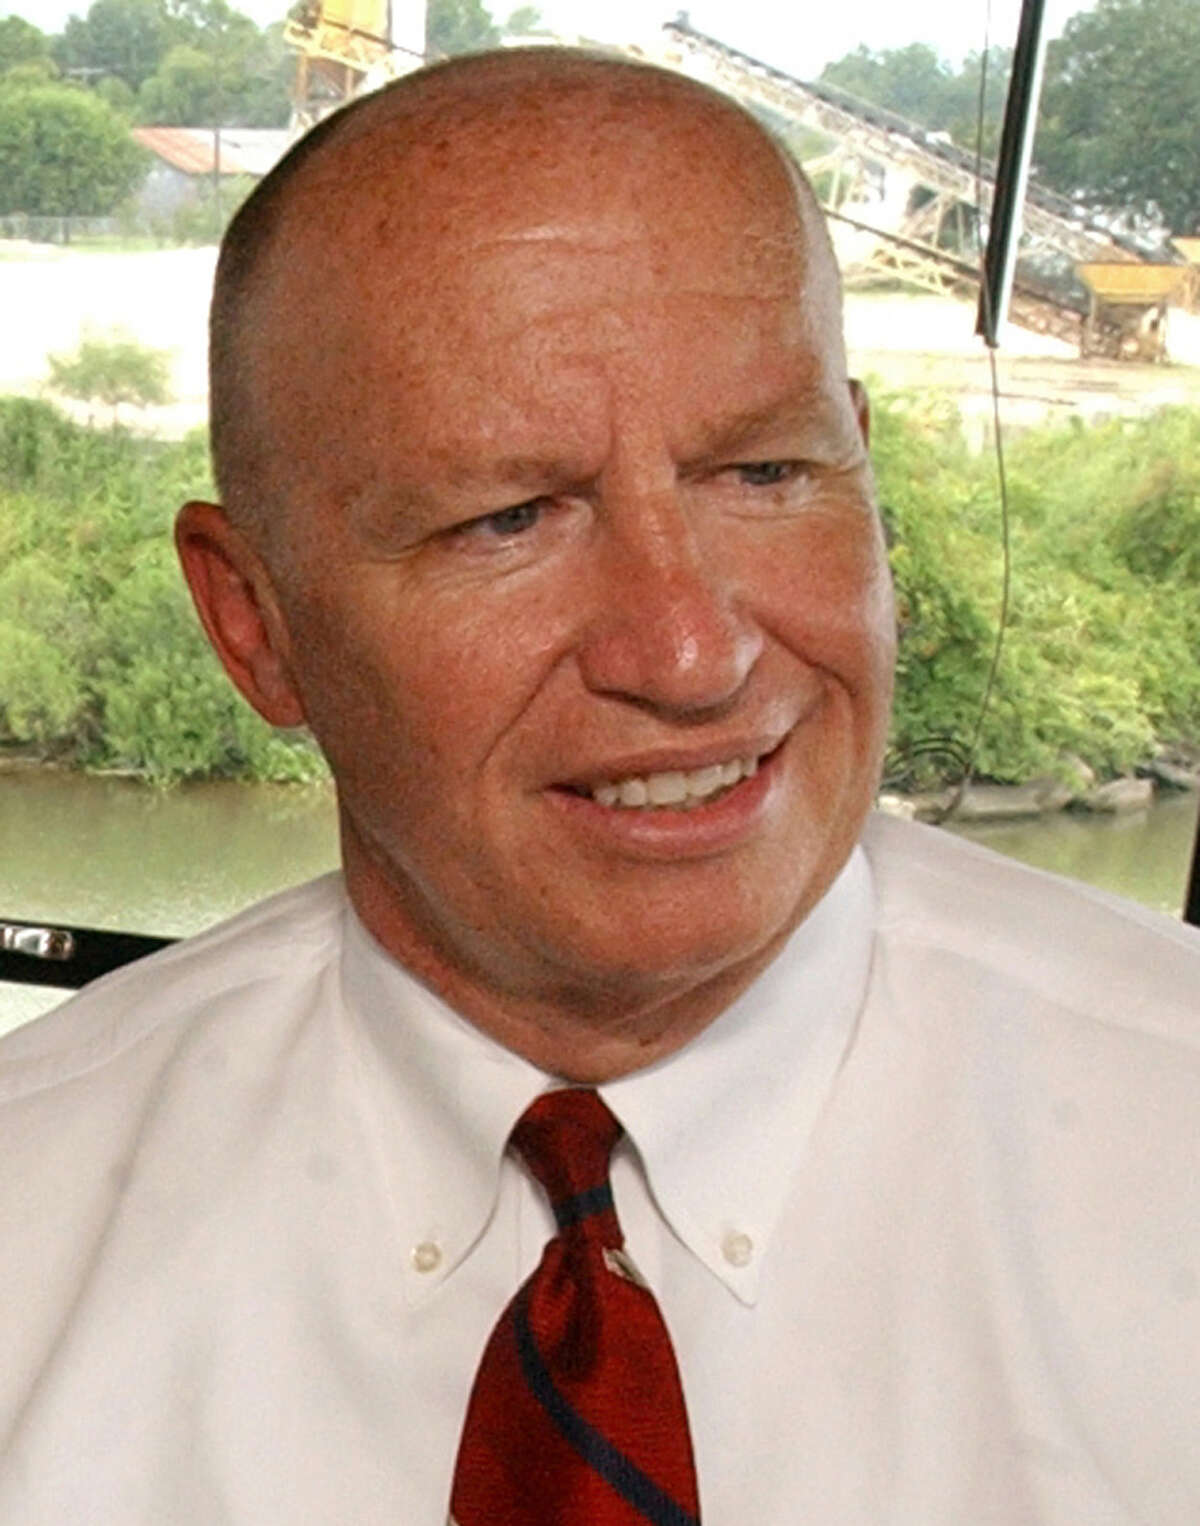 U.S. Rep. Kevin Brady, a Republican from The Woodlands, on Wednesday was named the new chairman of the tax-writing House Ways and Means Committee, the oldest committee in Congress. Brady's district once included Hardin and Orange counties until it was redrawn. He also is a former president of the Beaumont Chamber of Commerce in the early 1980s.